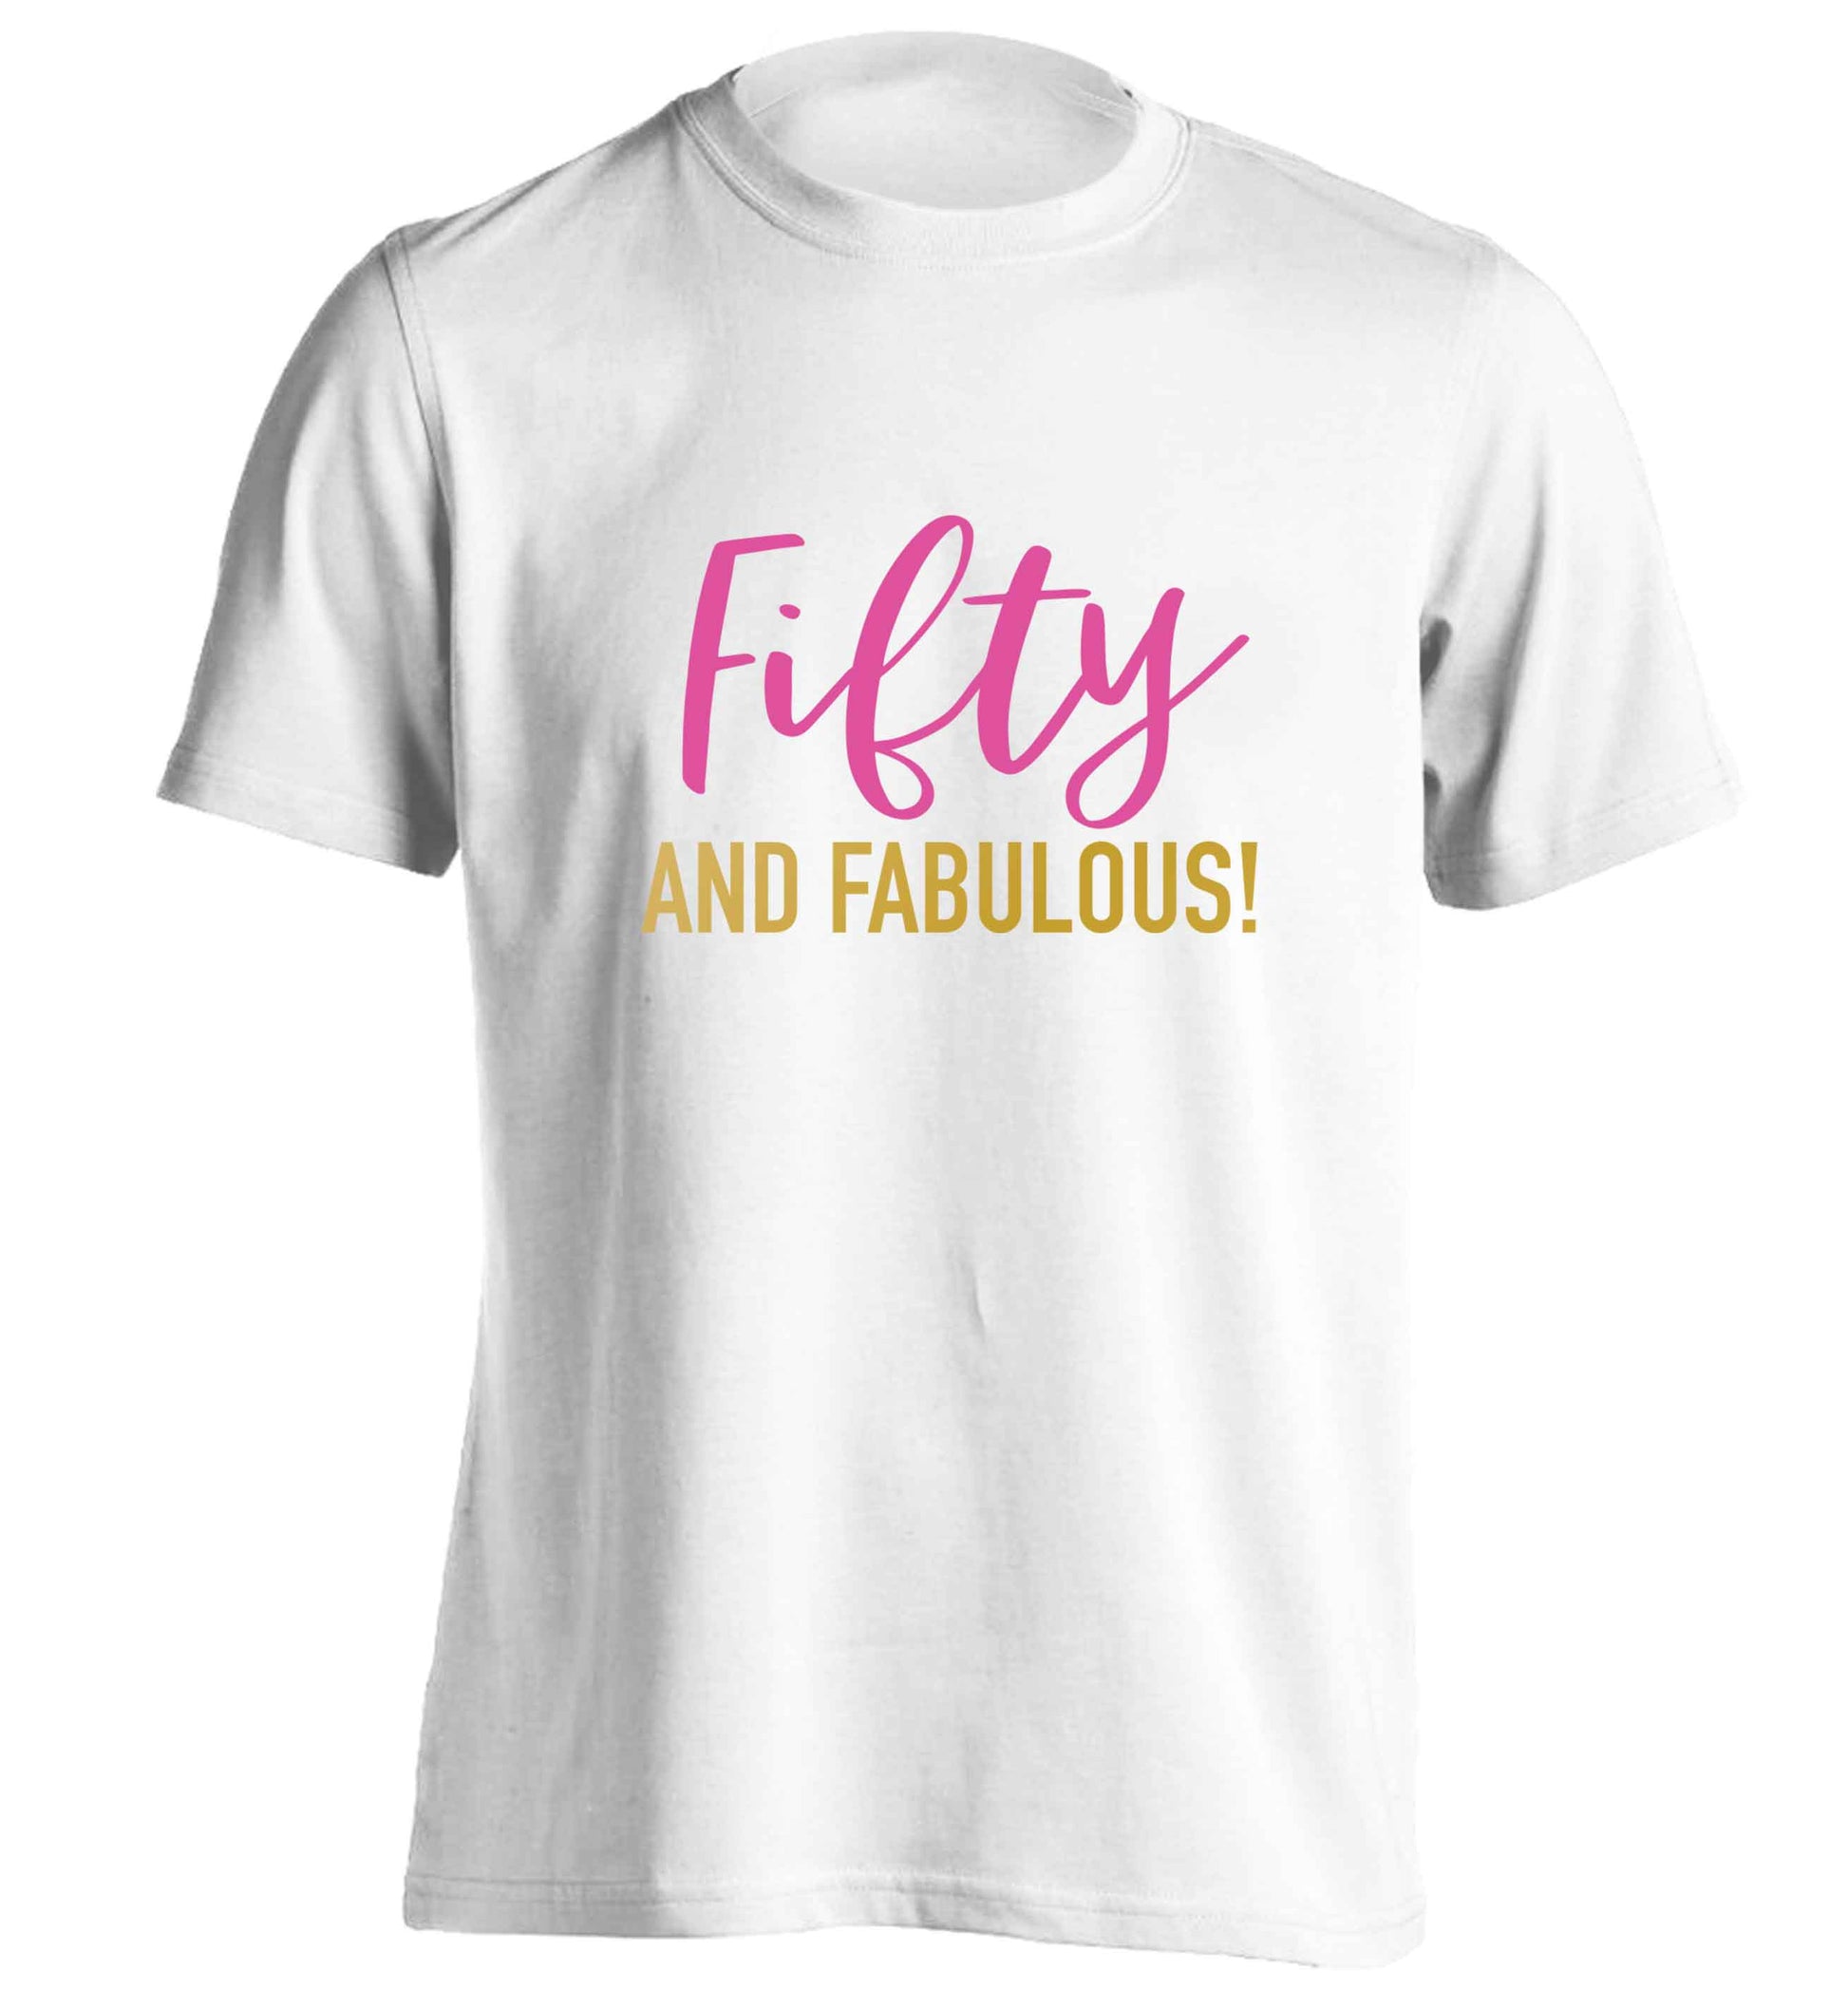 Fifty and fabulous adults unisex white Tshirt 2XL